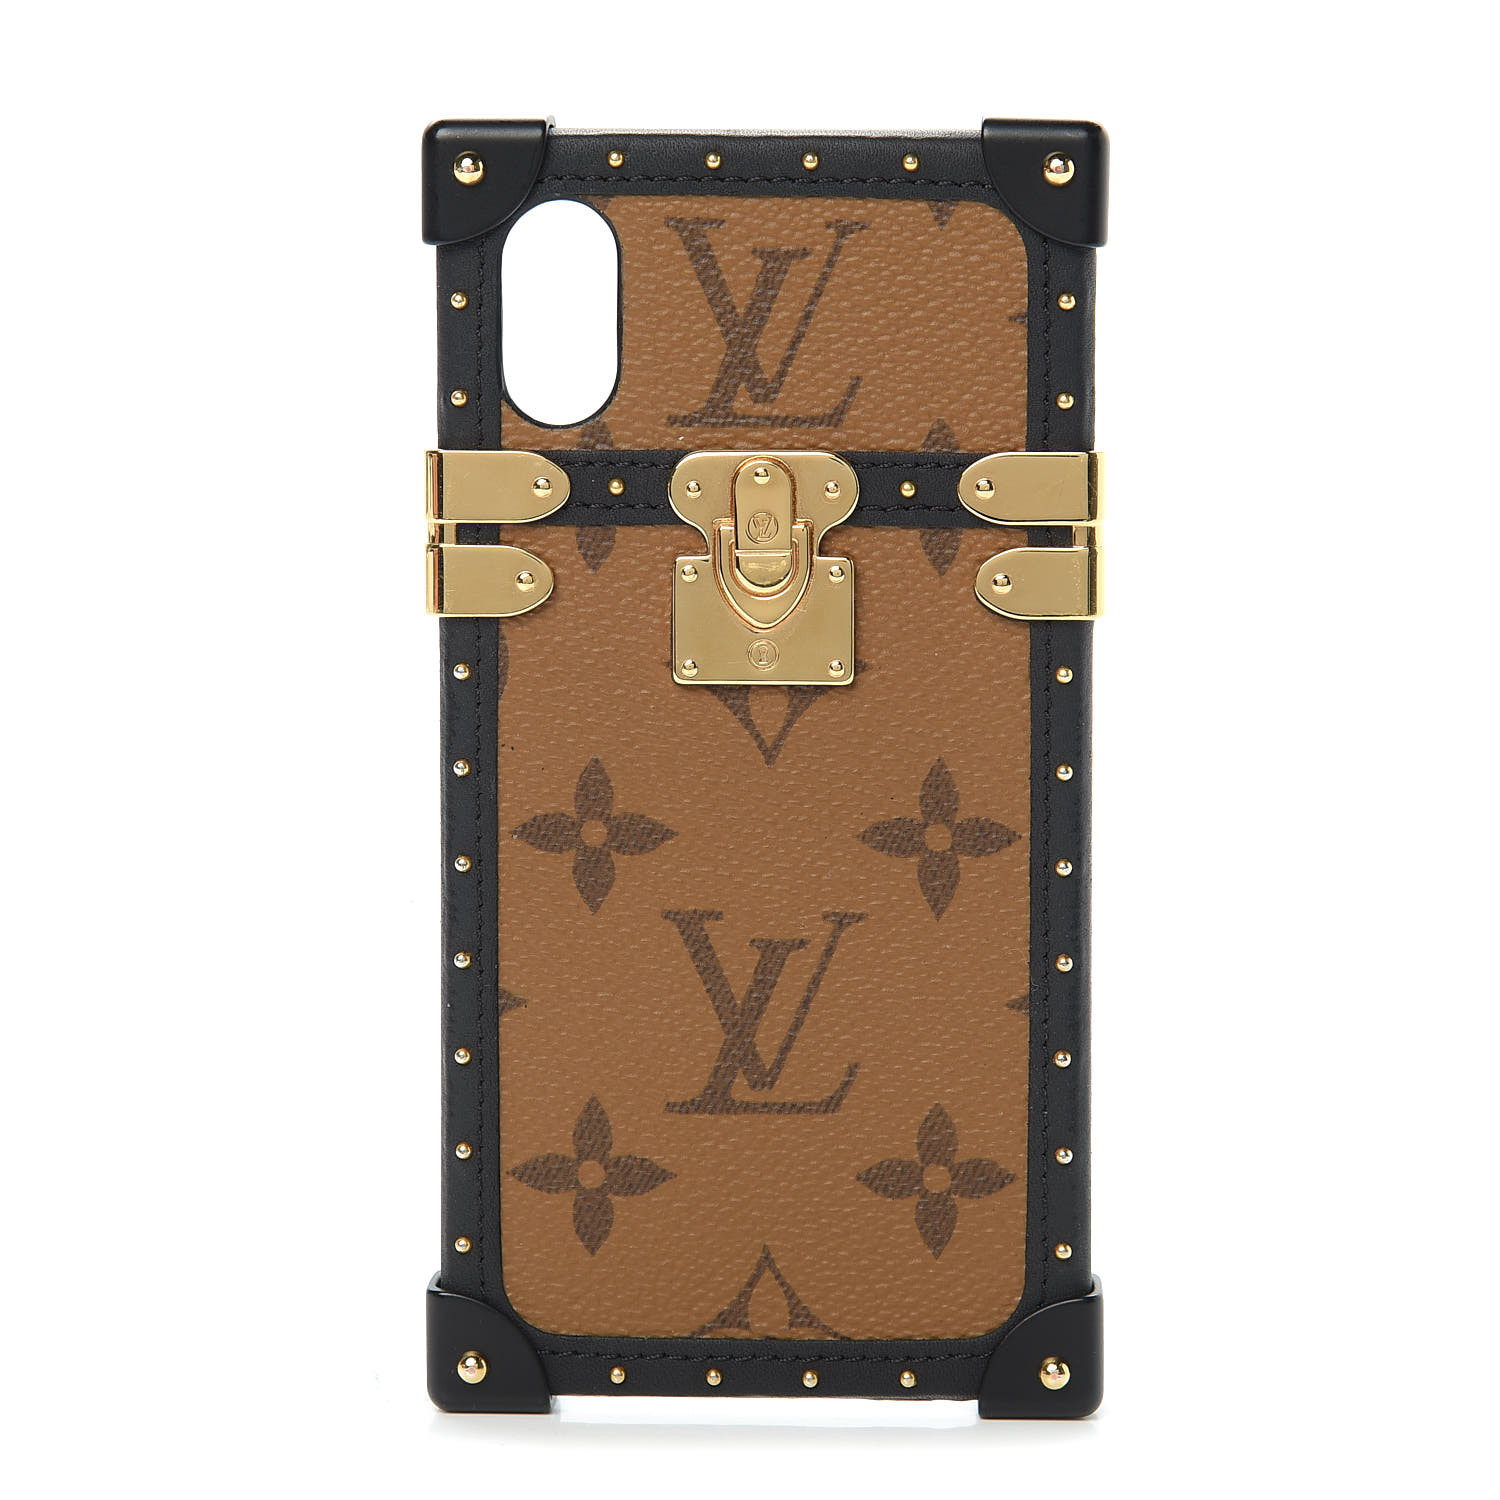 Lv Trunk Phone Case   Natural Resource Department